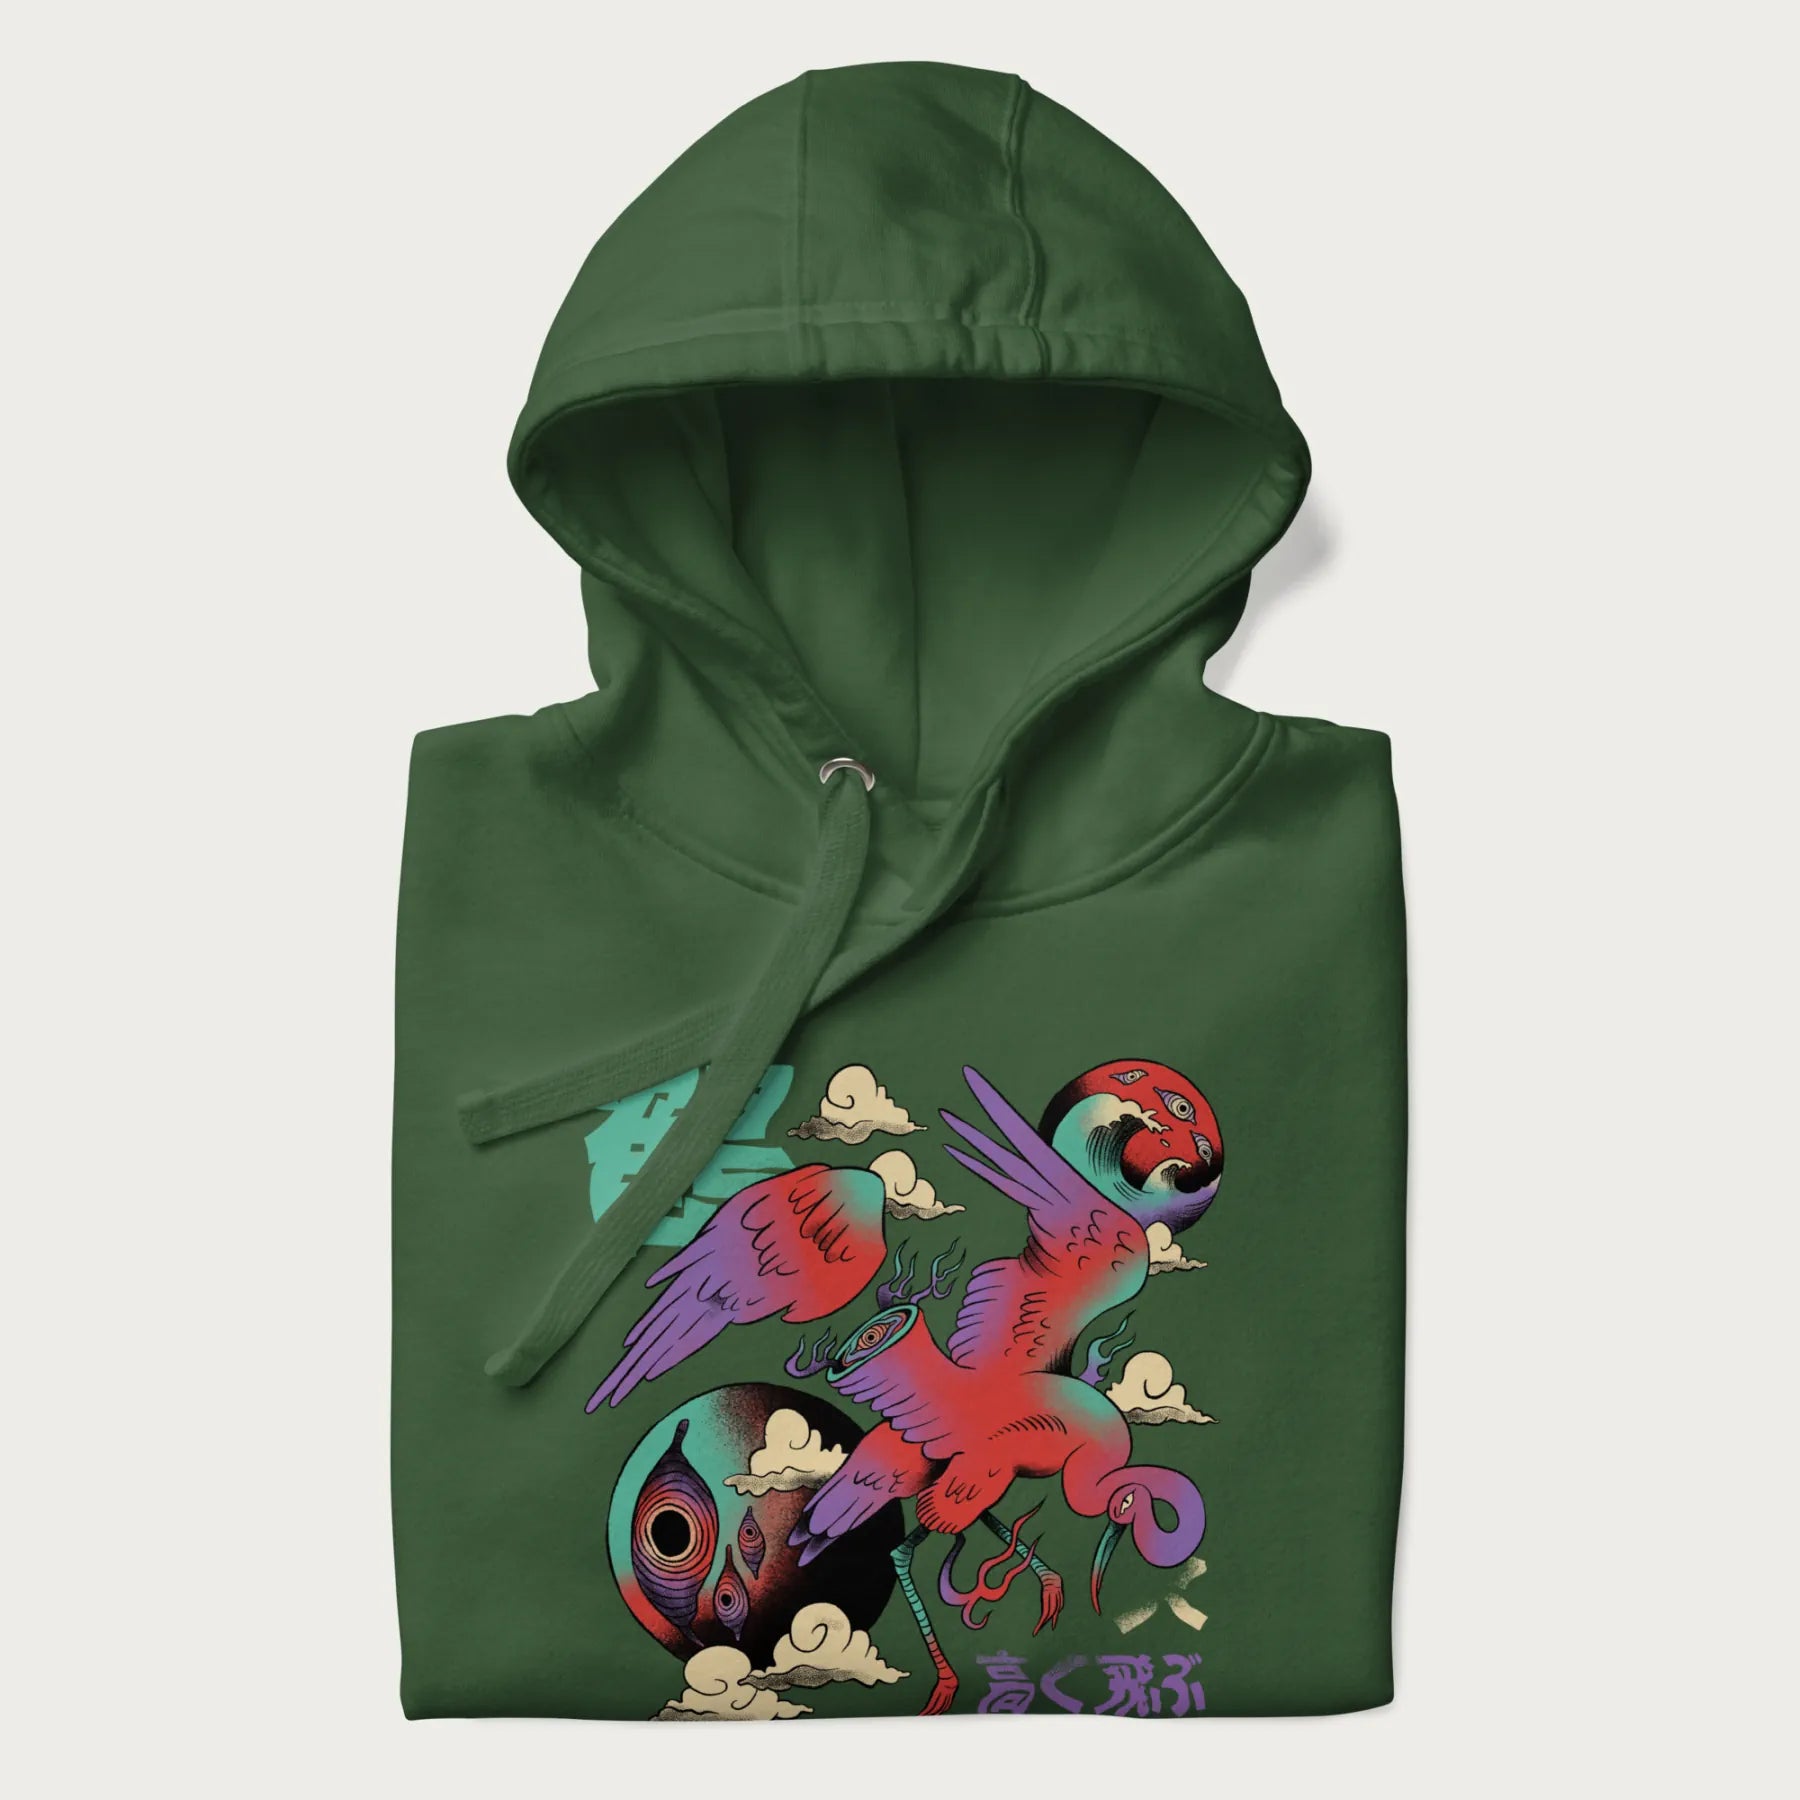 Folded forest green hoodie with Japanese crane graphic in vibrant colors and Japanese text '鶴' (Crane) and '高く飛ぶ' (Fly High).